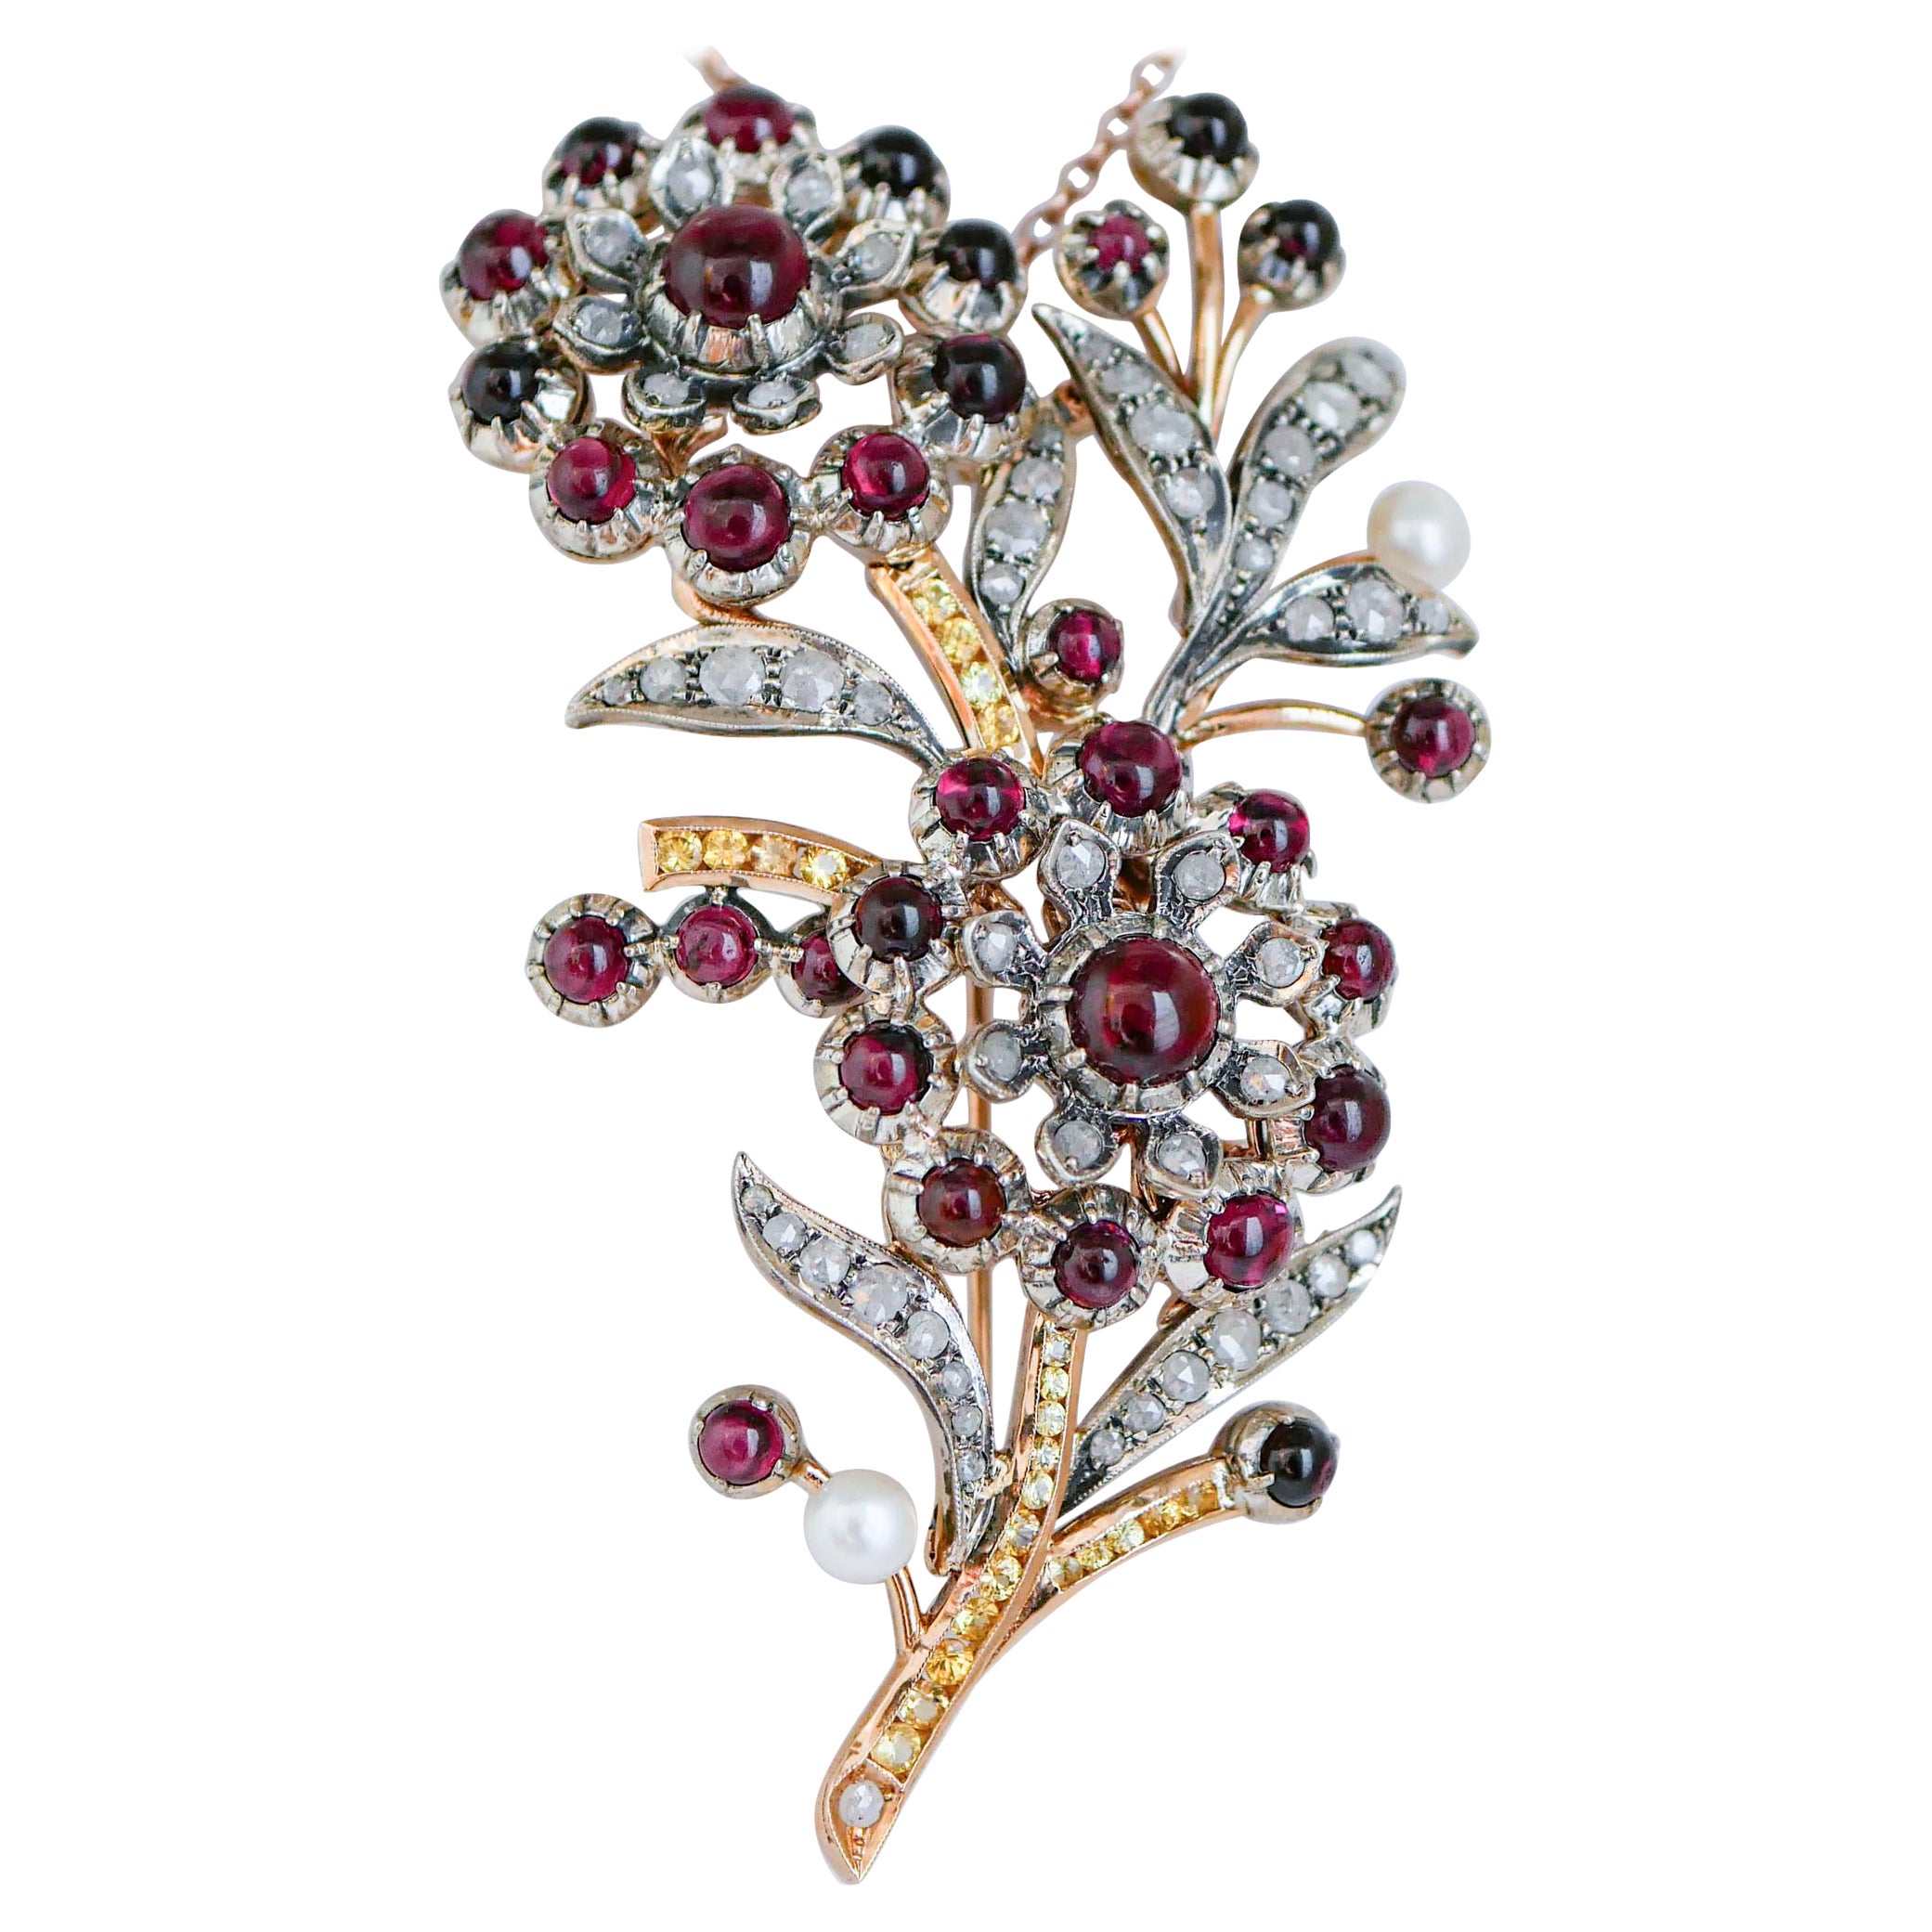 Garnets, Sapphires, Diamonds, Pearl, Rose Gold and Silver Brooch. For Sale